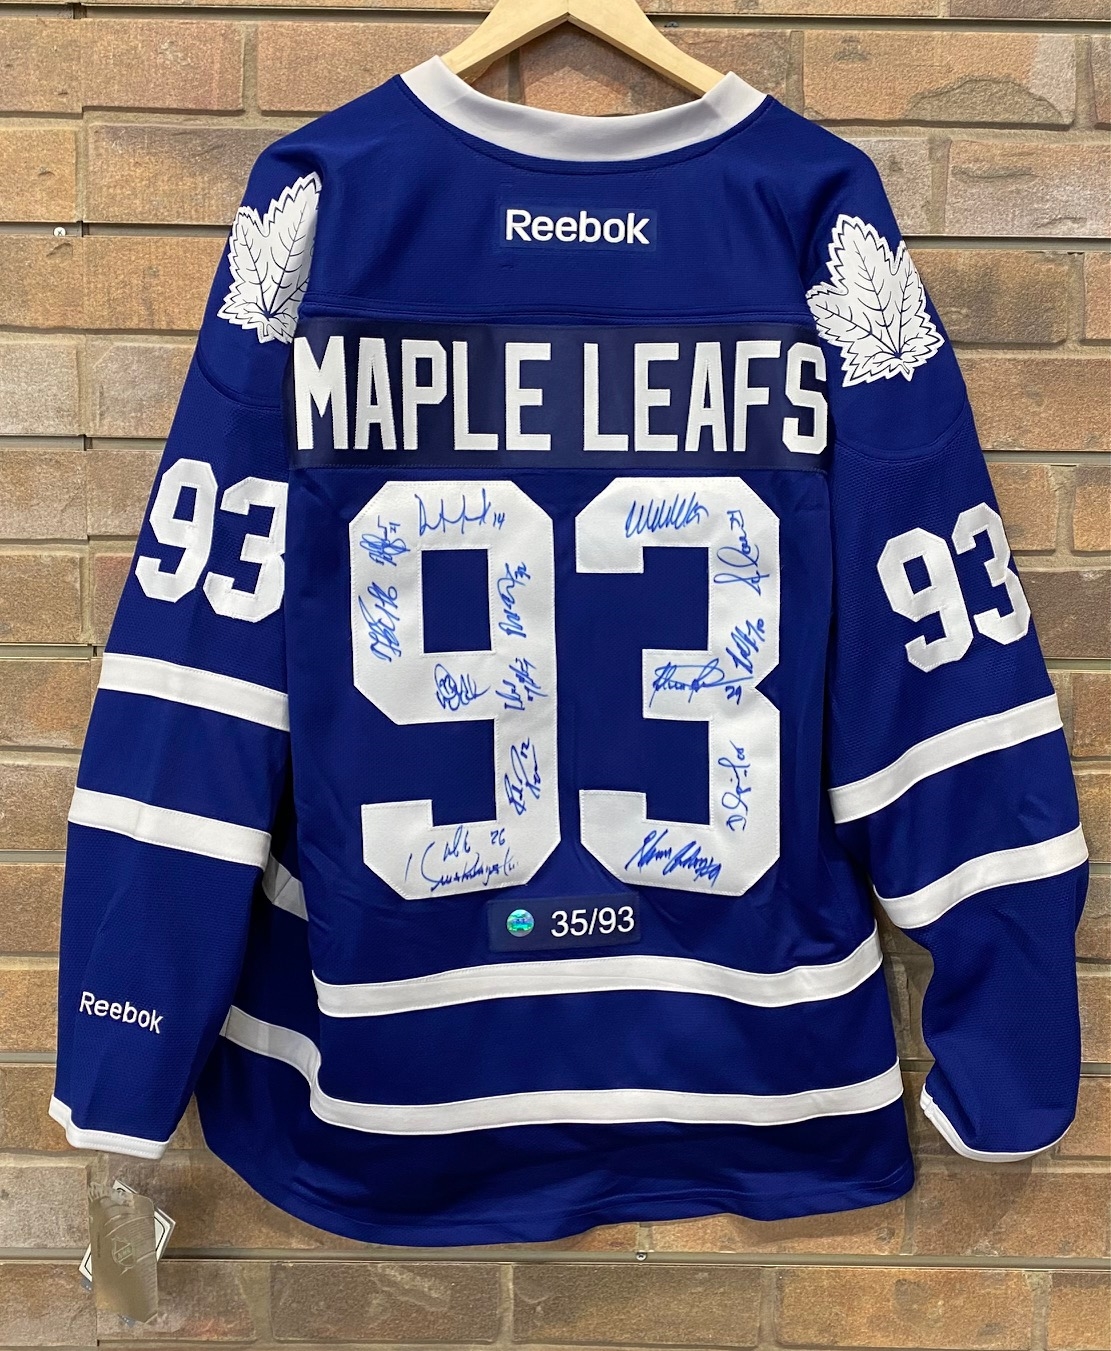 1993 Toronto Maple Leafs 14 Player Team Signed Semi-Finals Game 7 Reebok Jersey #35/93